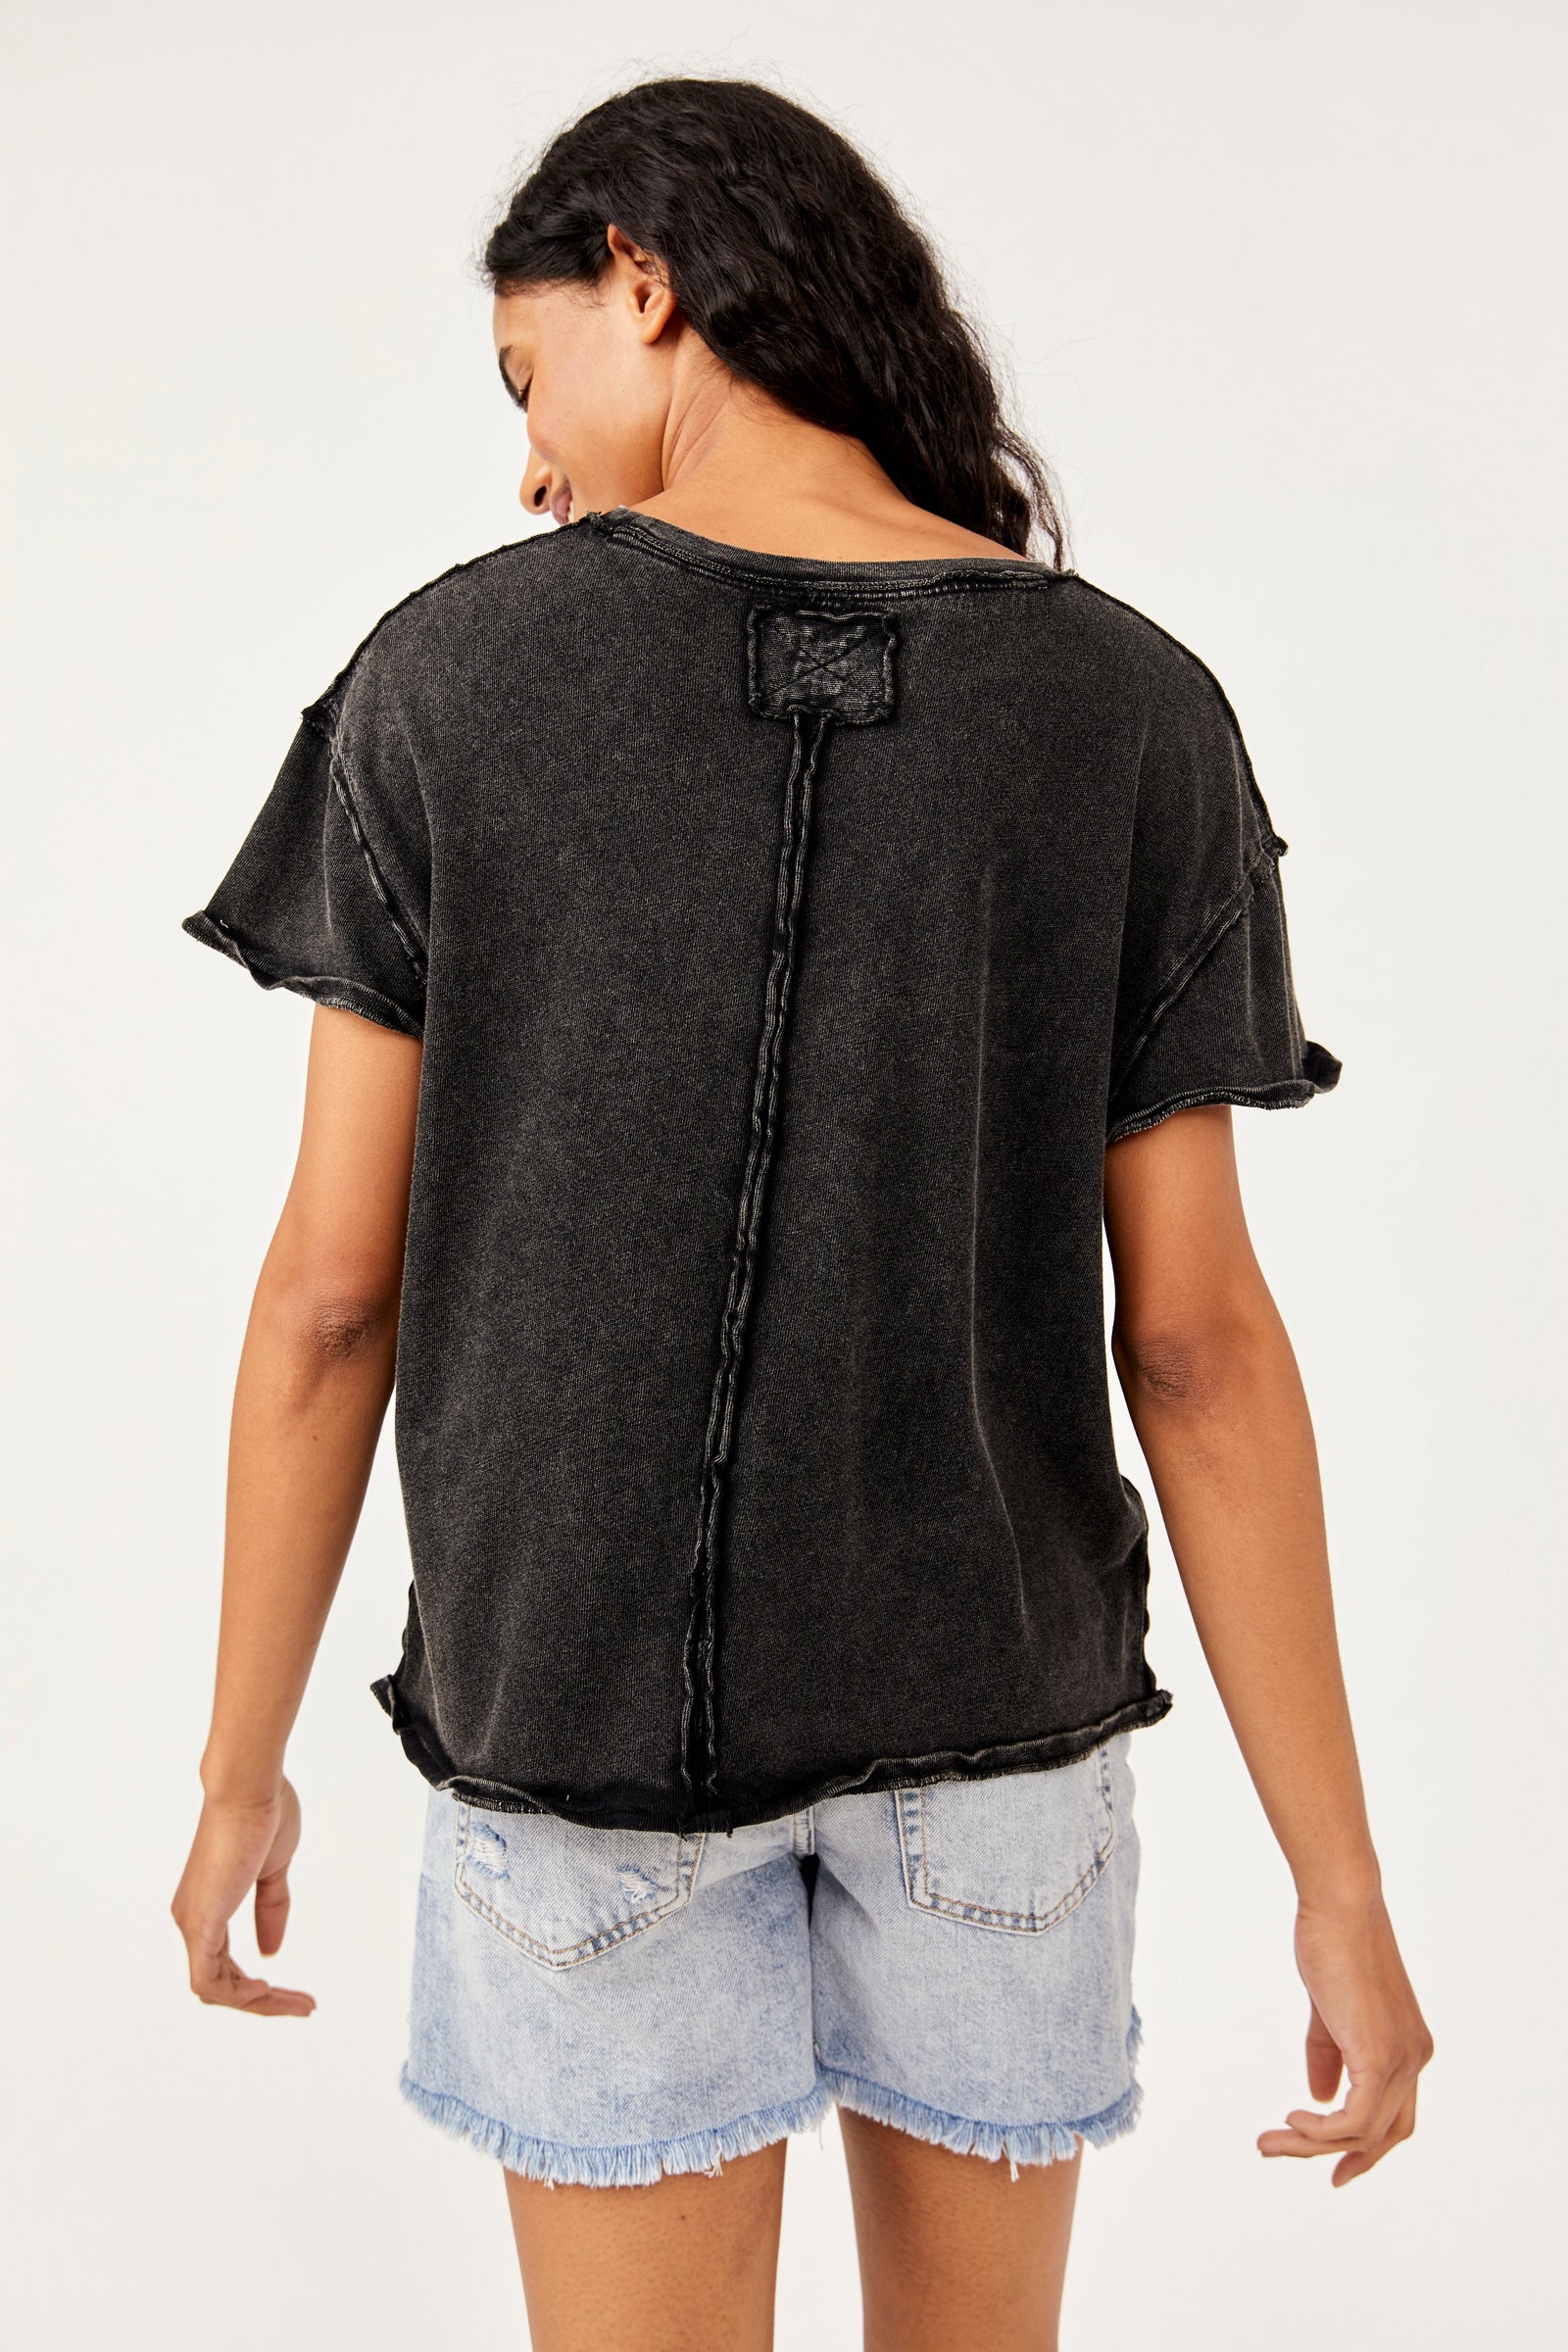 FREE PEOPLE - CUT OUT TEE